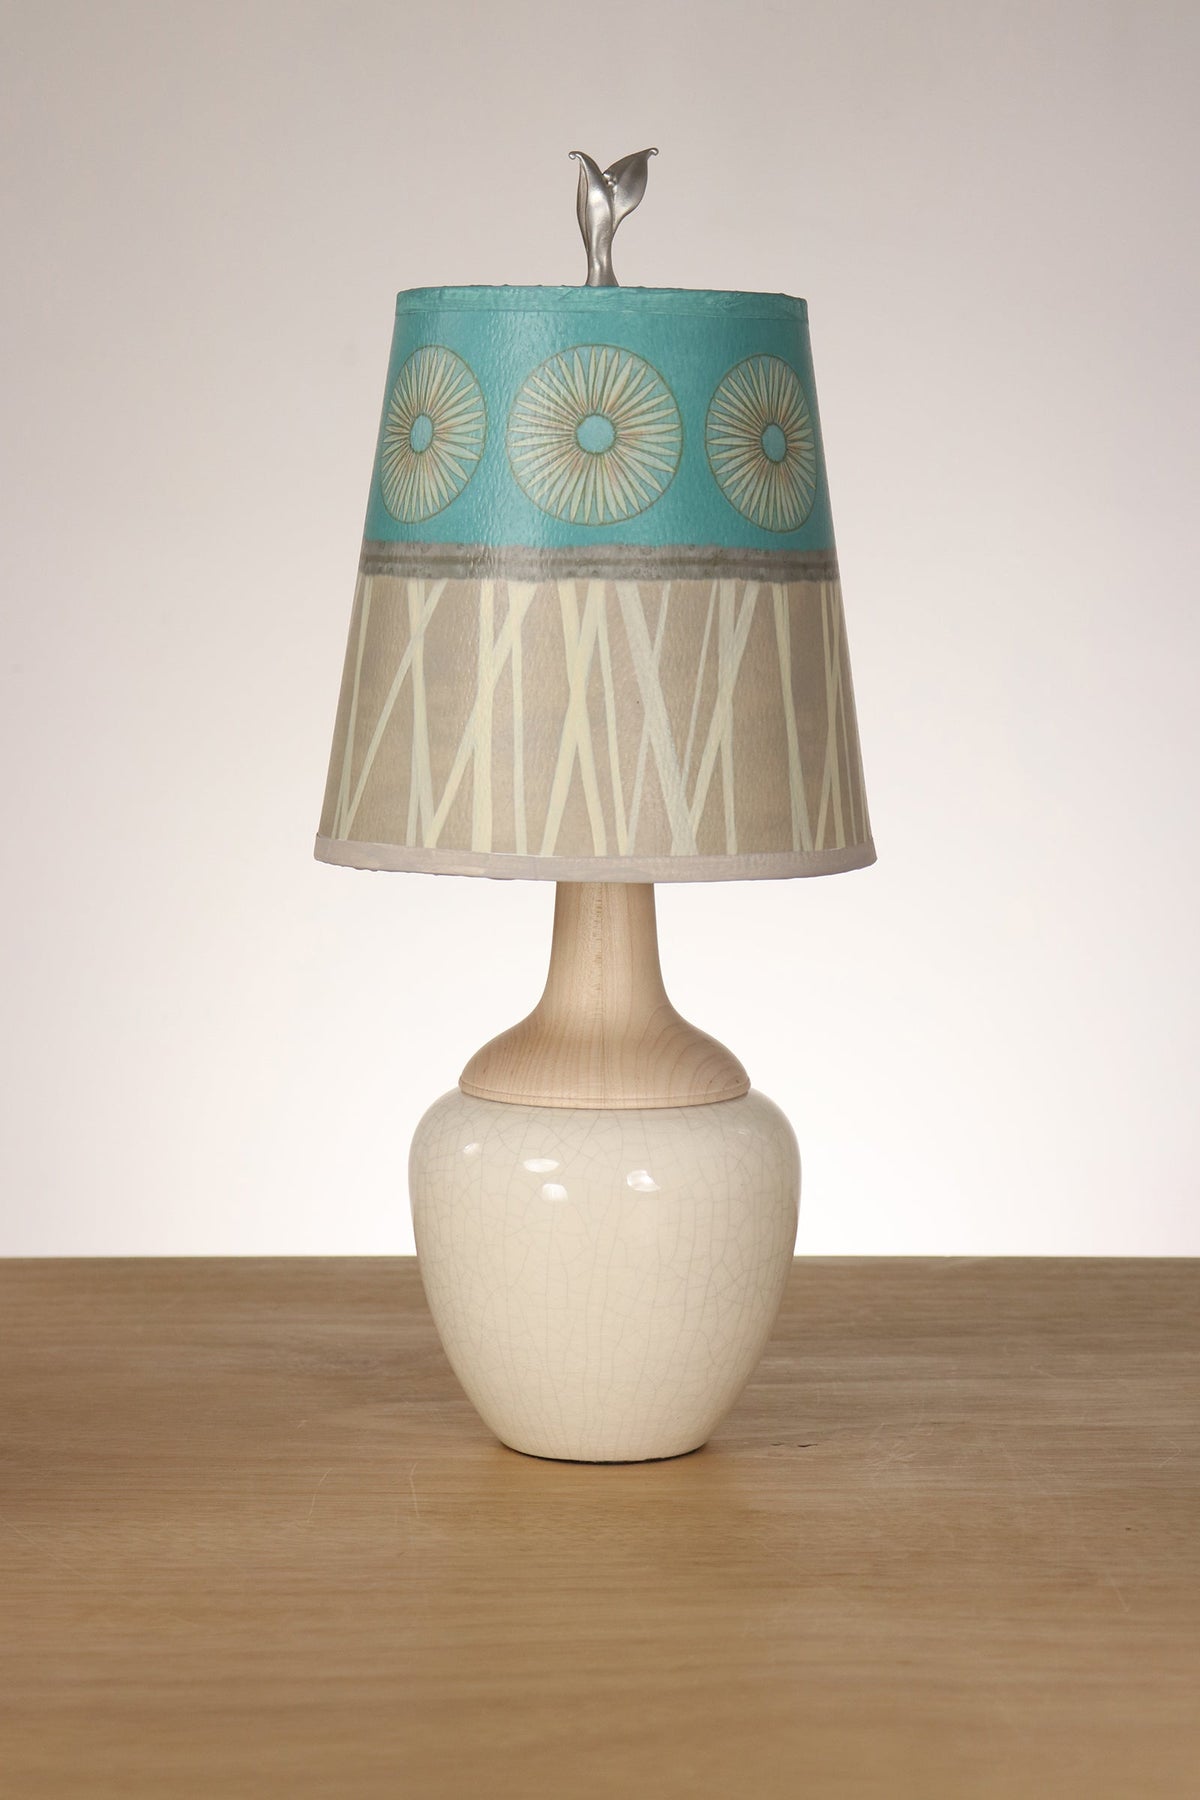 Limited Batch Ceramic Crackle Lamp with Small Drum Shade in Pool